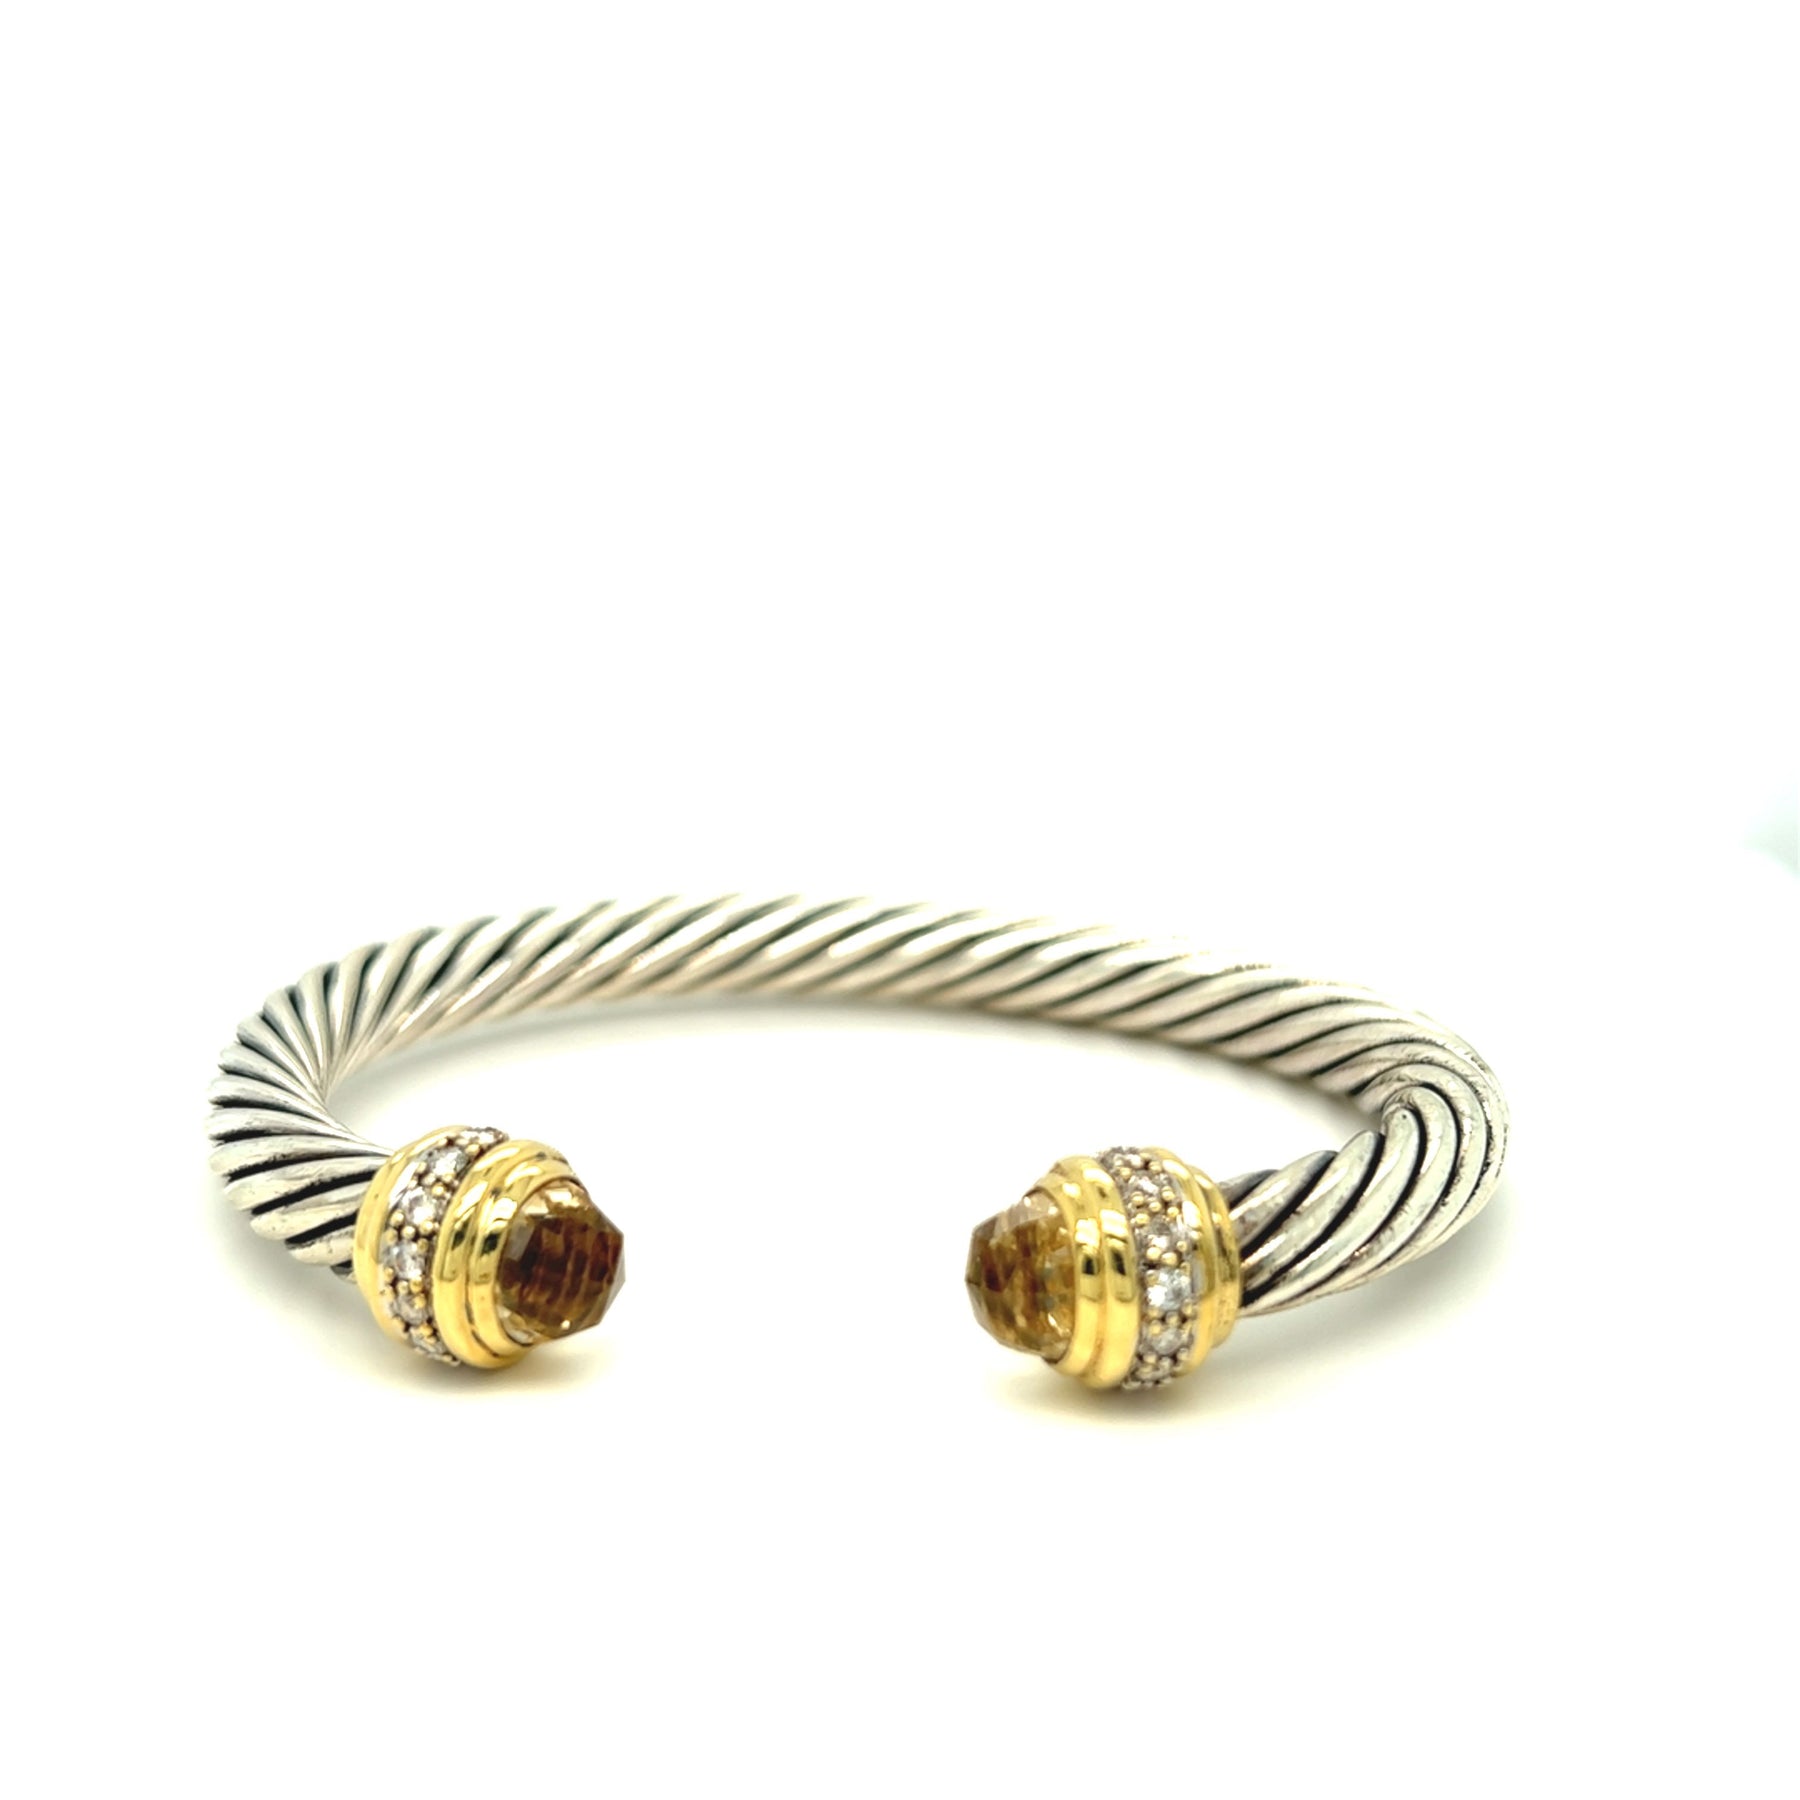 – Diamond Forever Gems Silver David Cable Are Yurman Cuff and Bracelet Bangle Citrine and